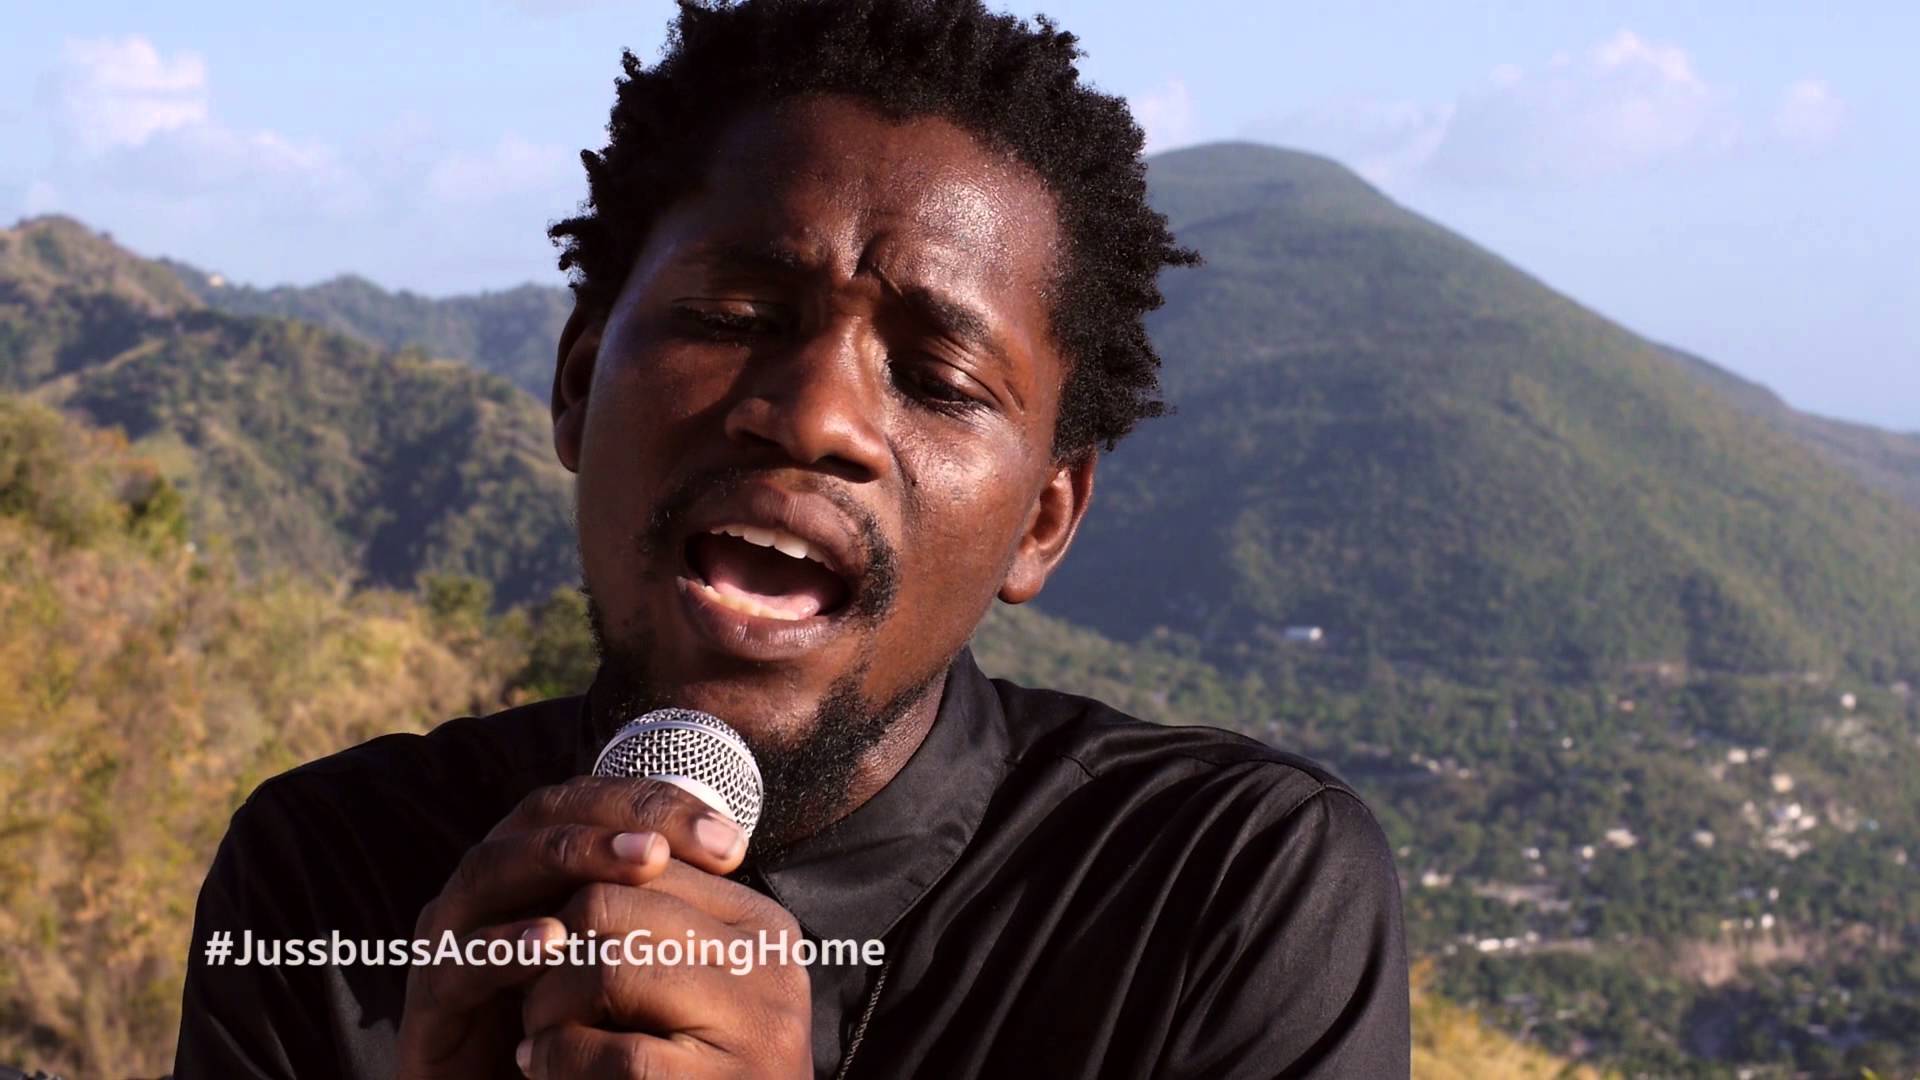 Pentateuch - Going Home @ Jussbuss Acoustic [7/14/2015]